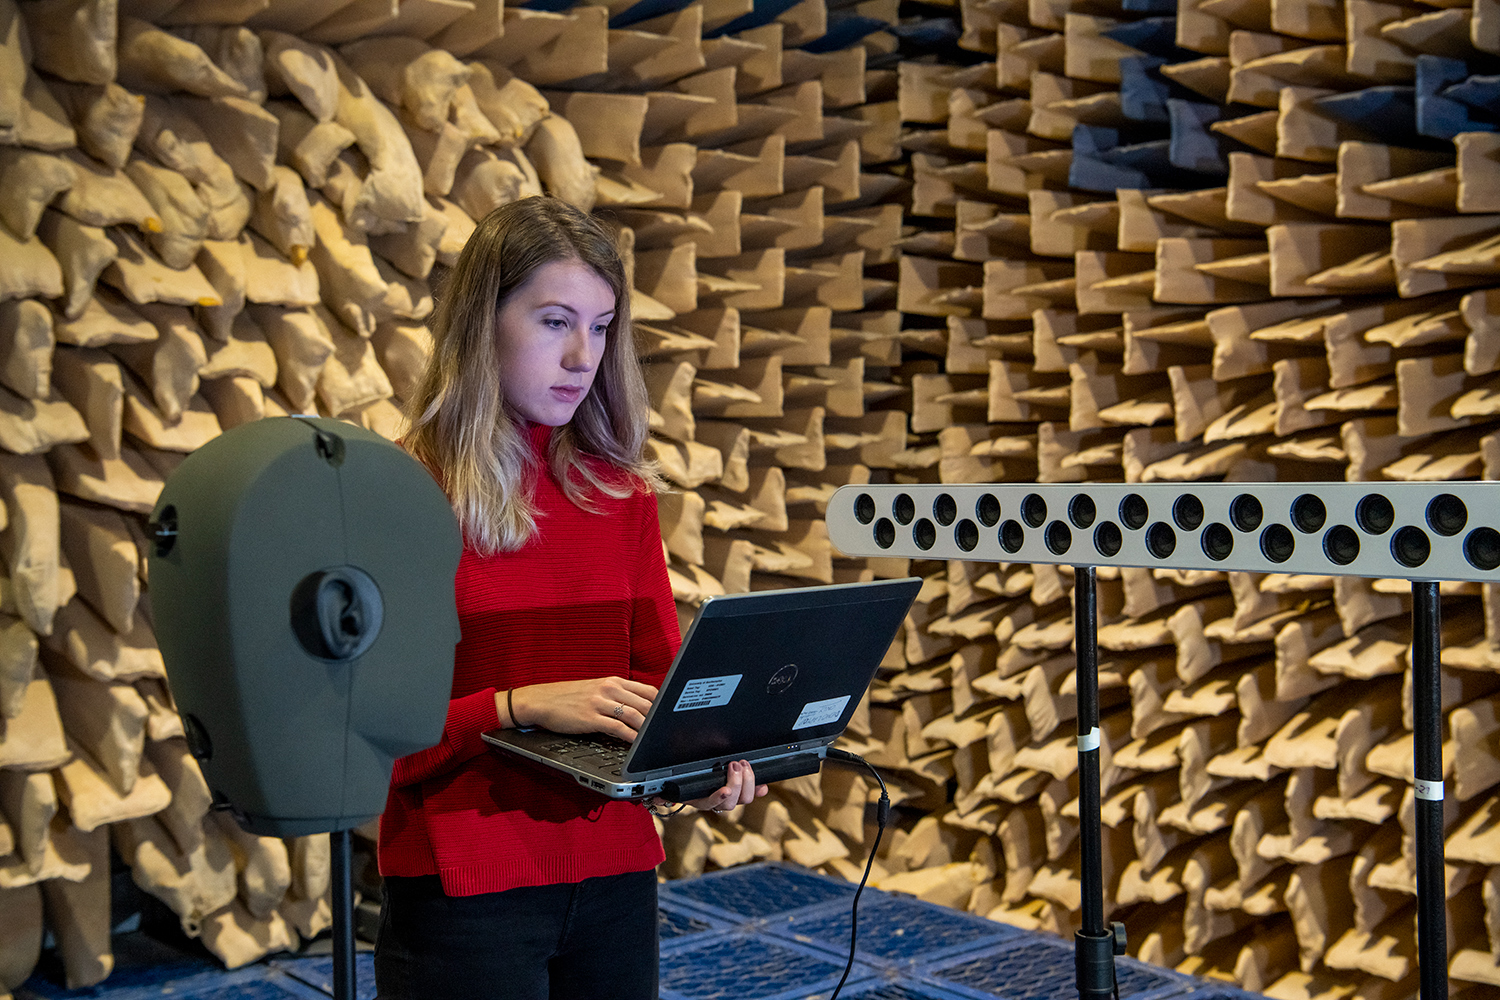 Testing a loudspeaker array in the University of Southampton’s large anechoic chamber. (Image: © University of Southampton)